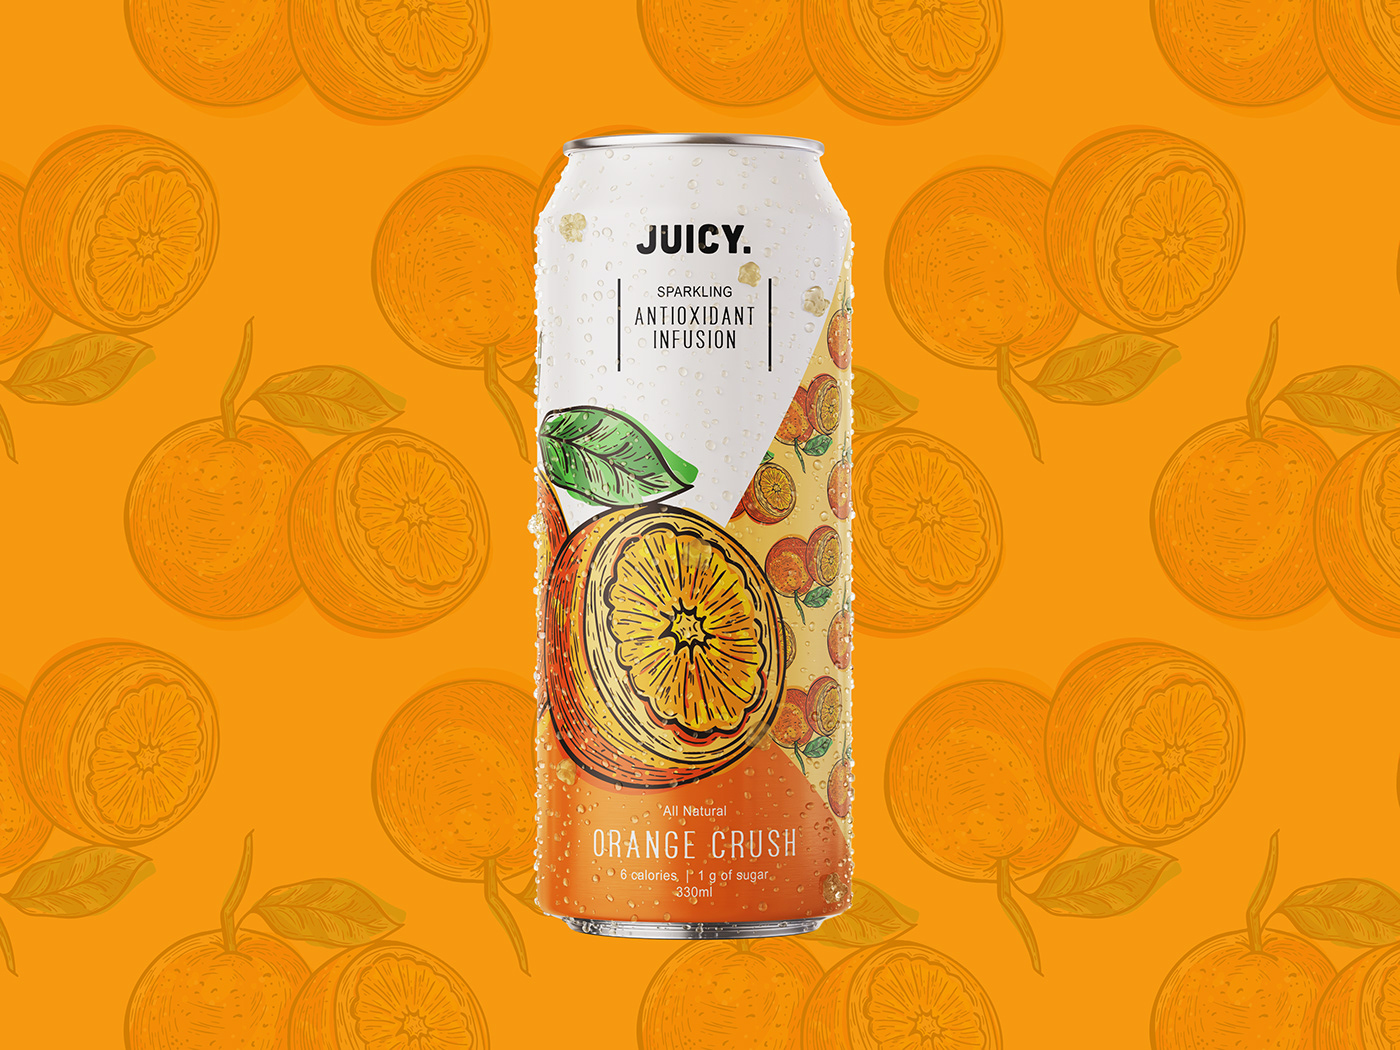 Label design of orange drink. Beverage can for antioxidant infusion water. 